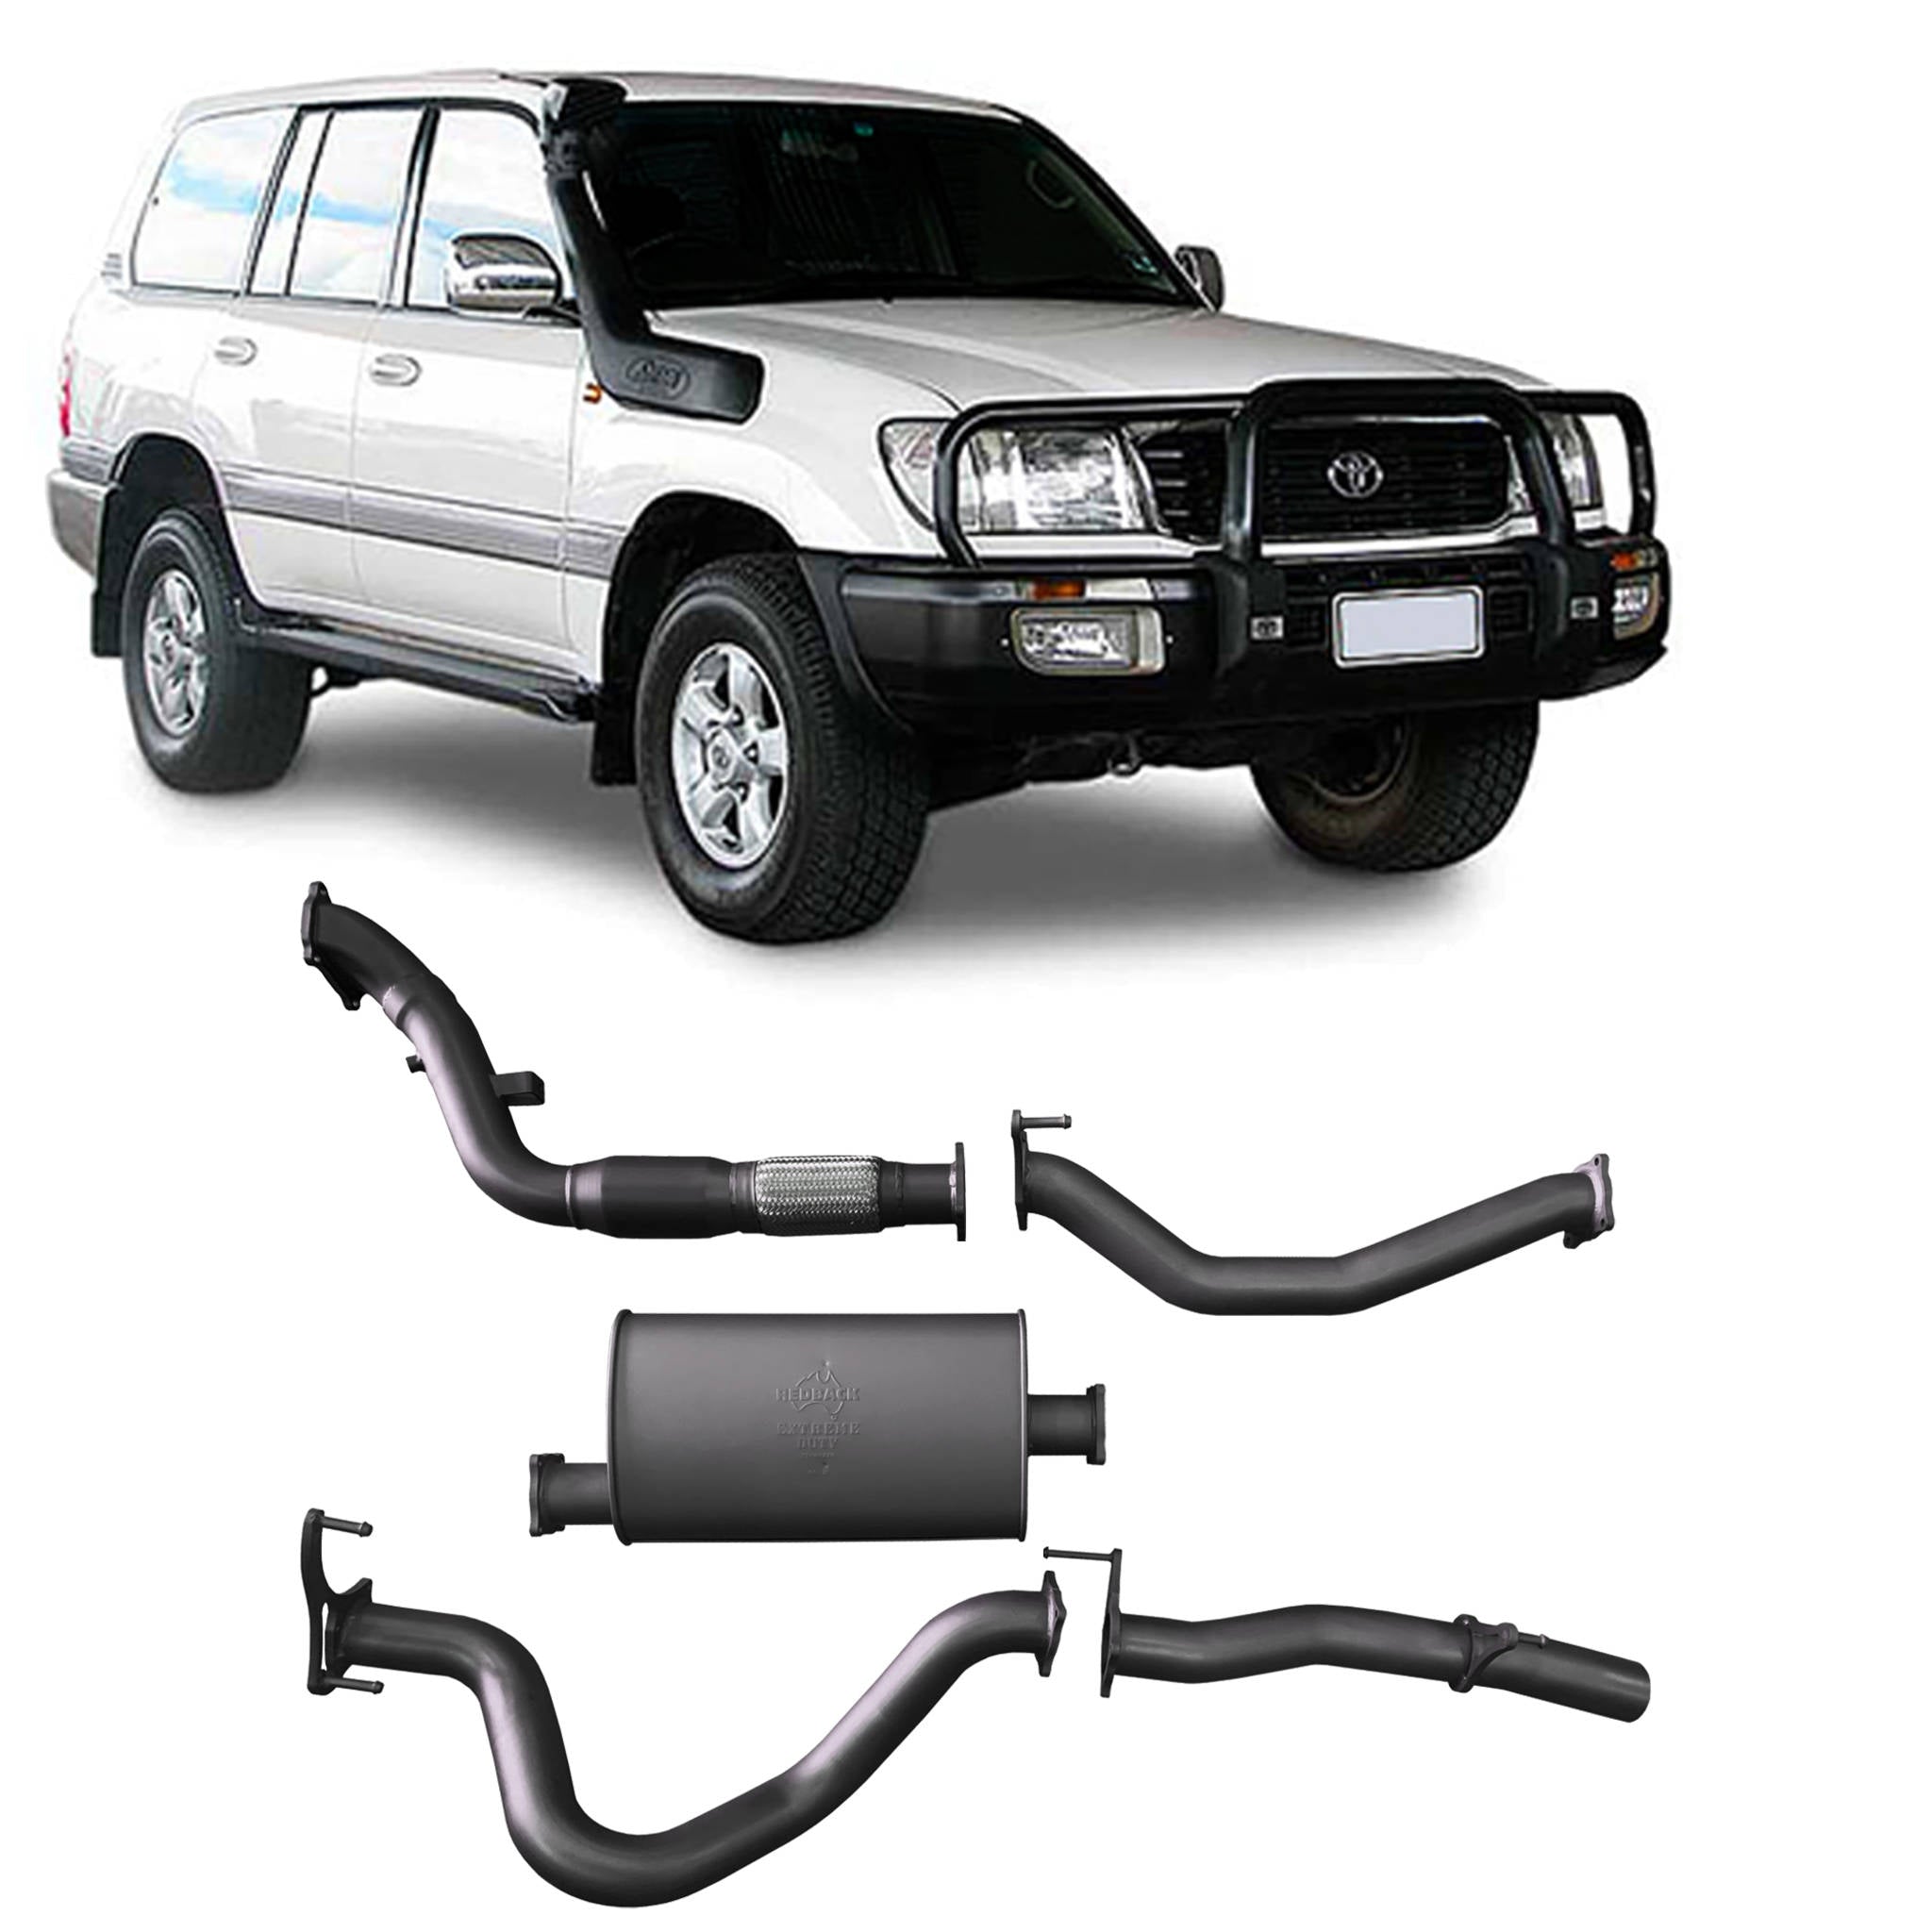 Redback Extreme Duty Exhaust to suit Toyota Landcruiser 100 Series 4.2L (10/2000 - 10/2007)